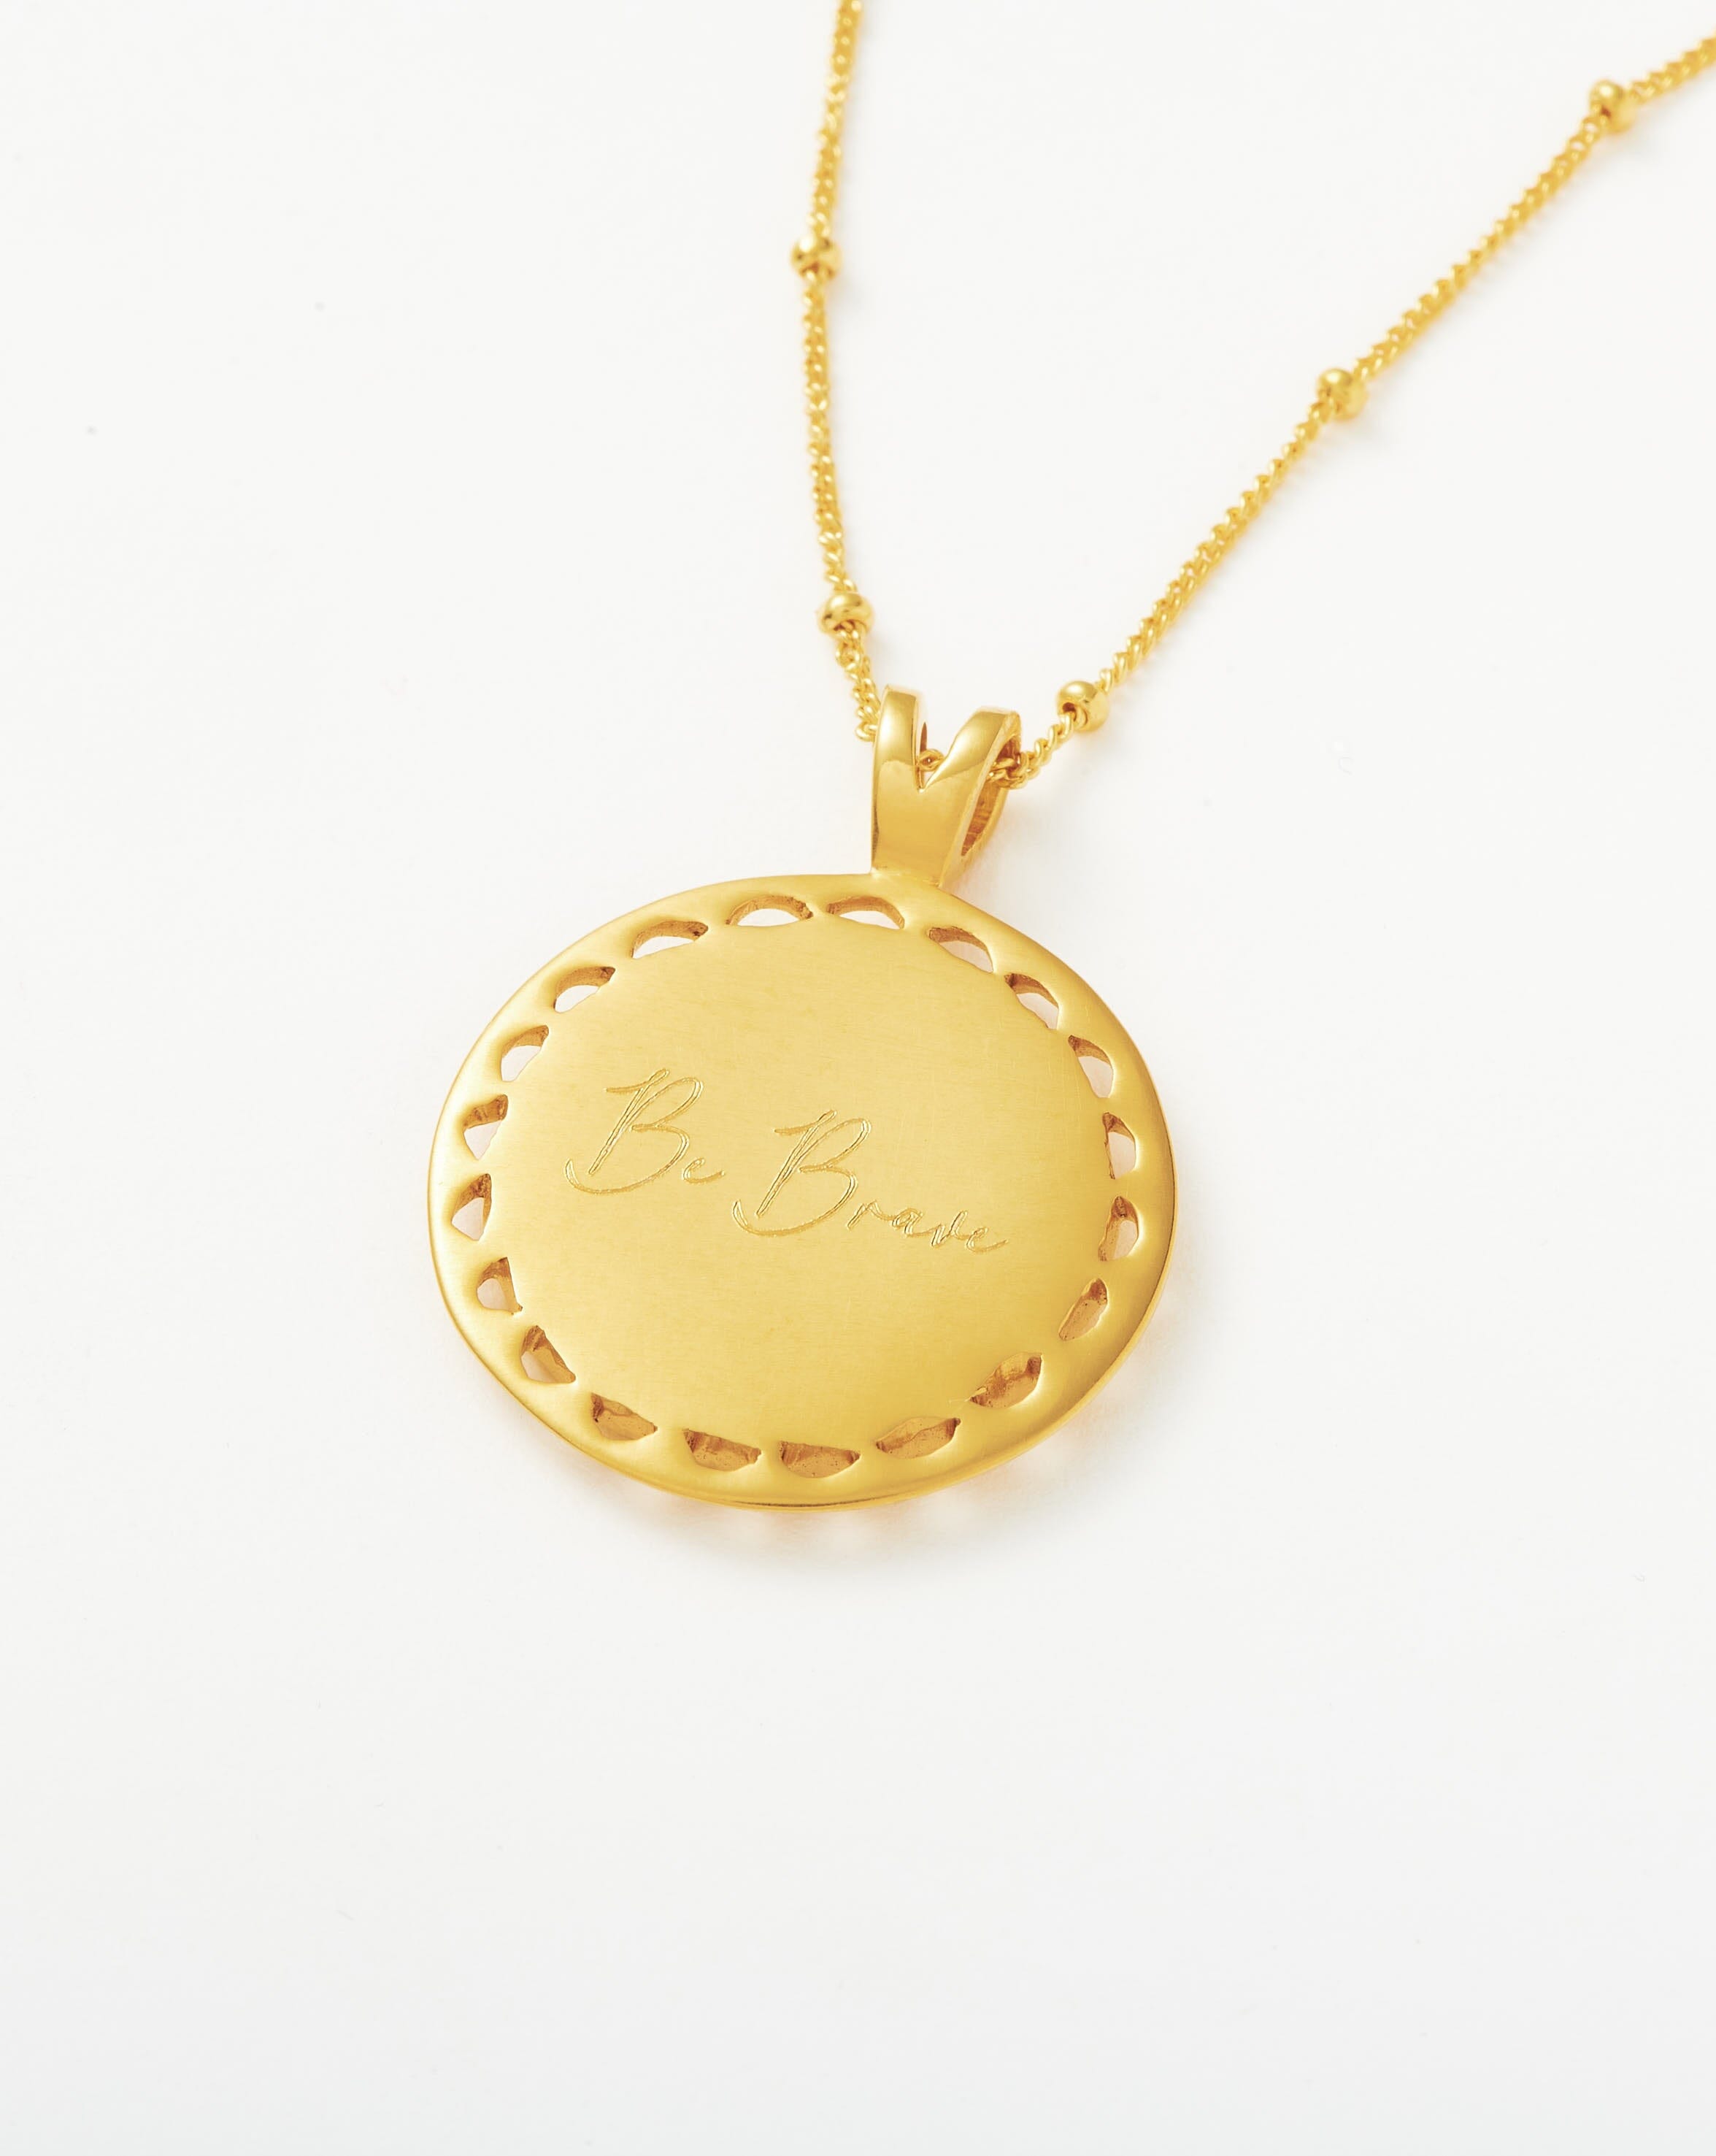 Louis Vuitton Blooming Supple Gold Plated Necklace, myGemma